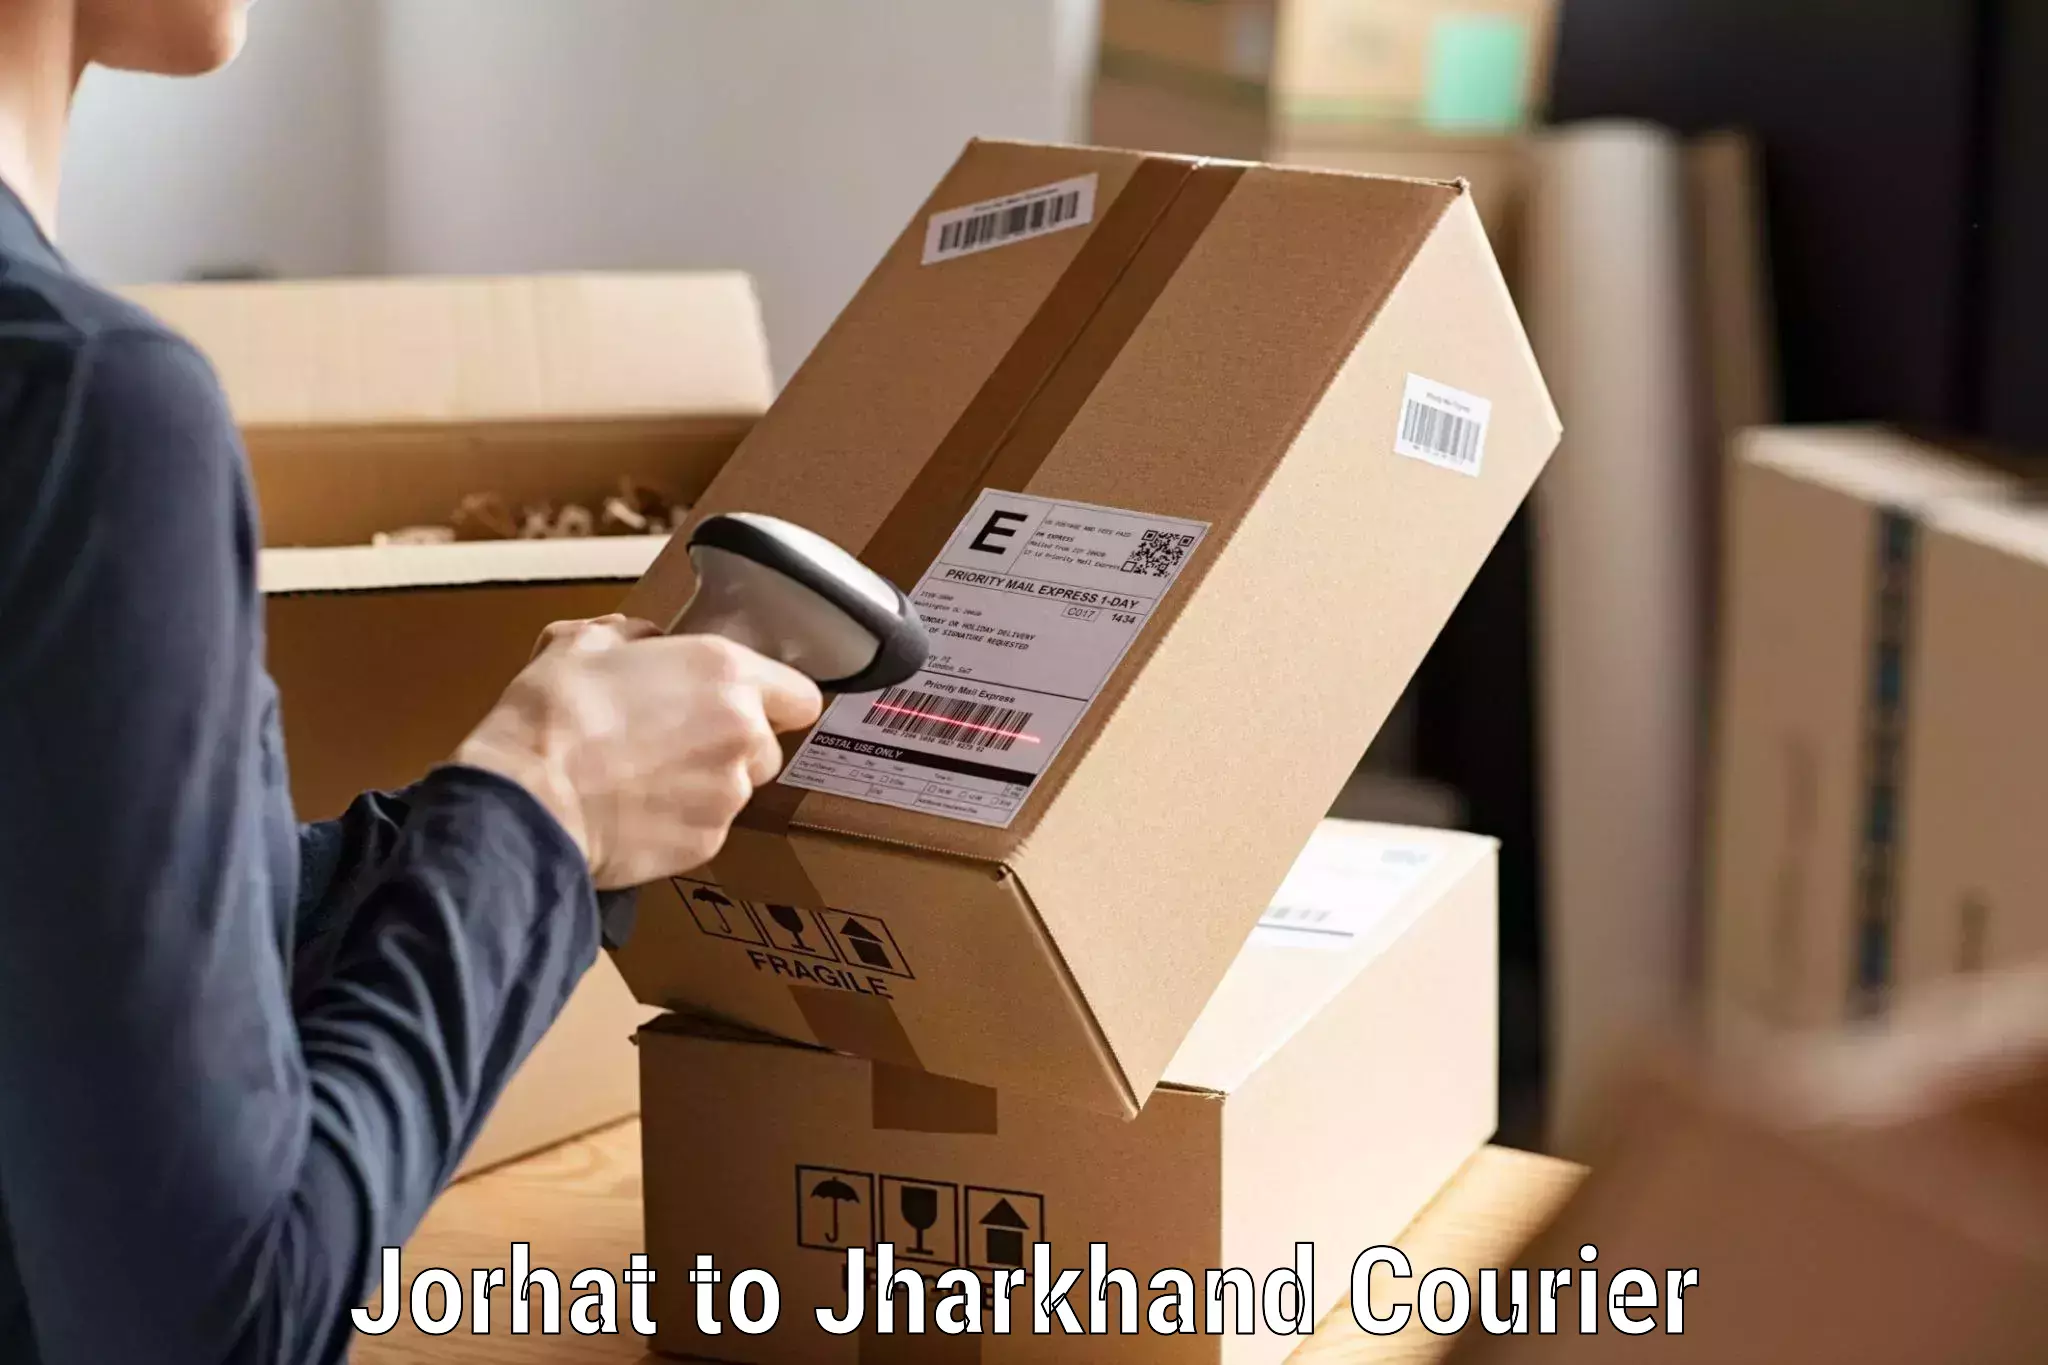 Dynamic courier services Jorhat to Bokaro